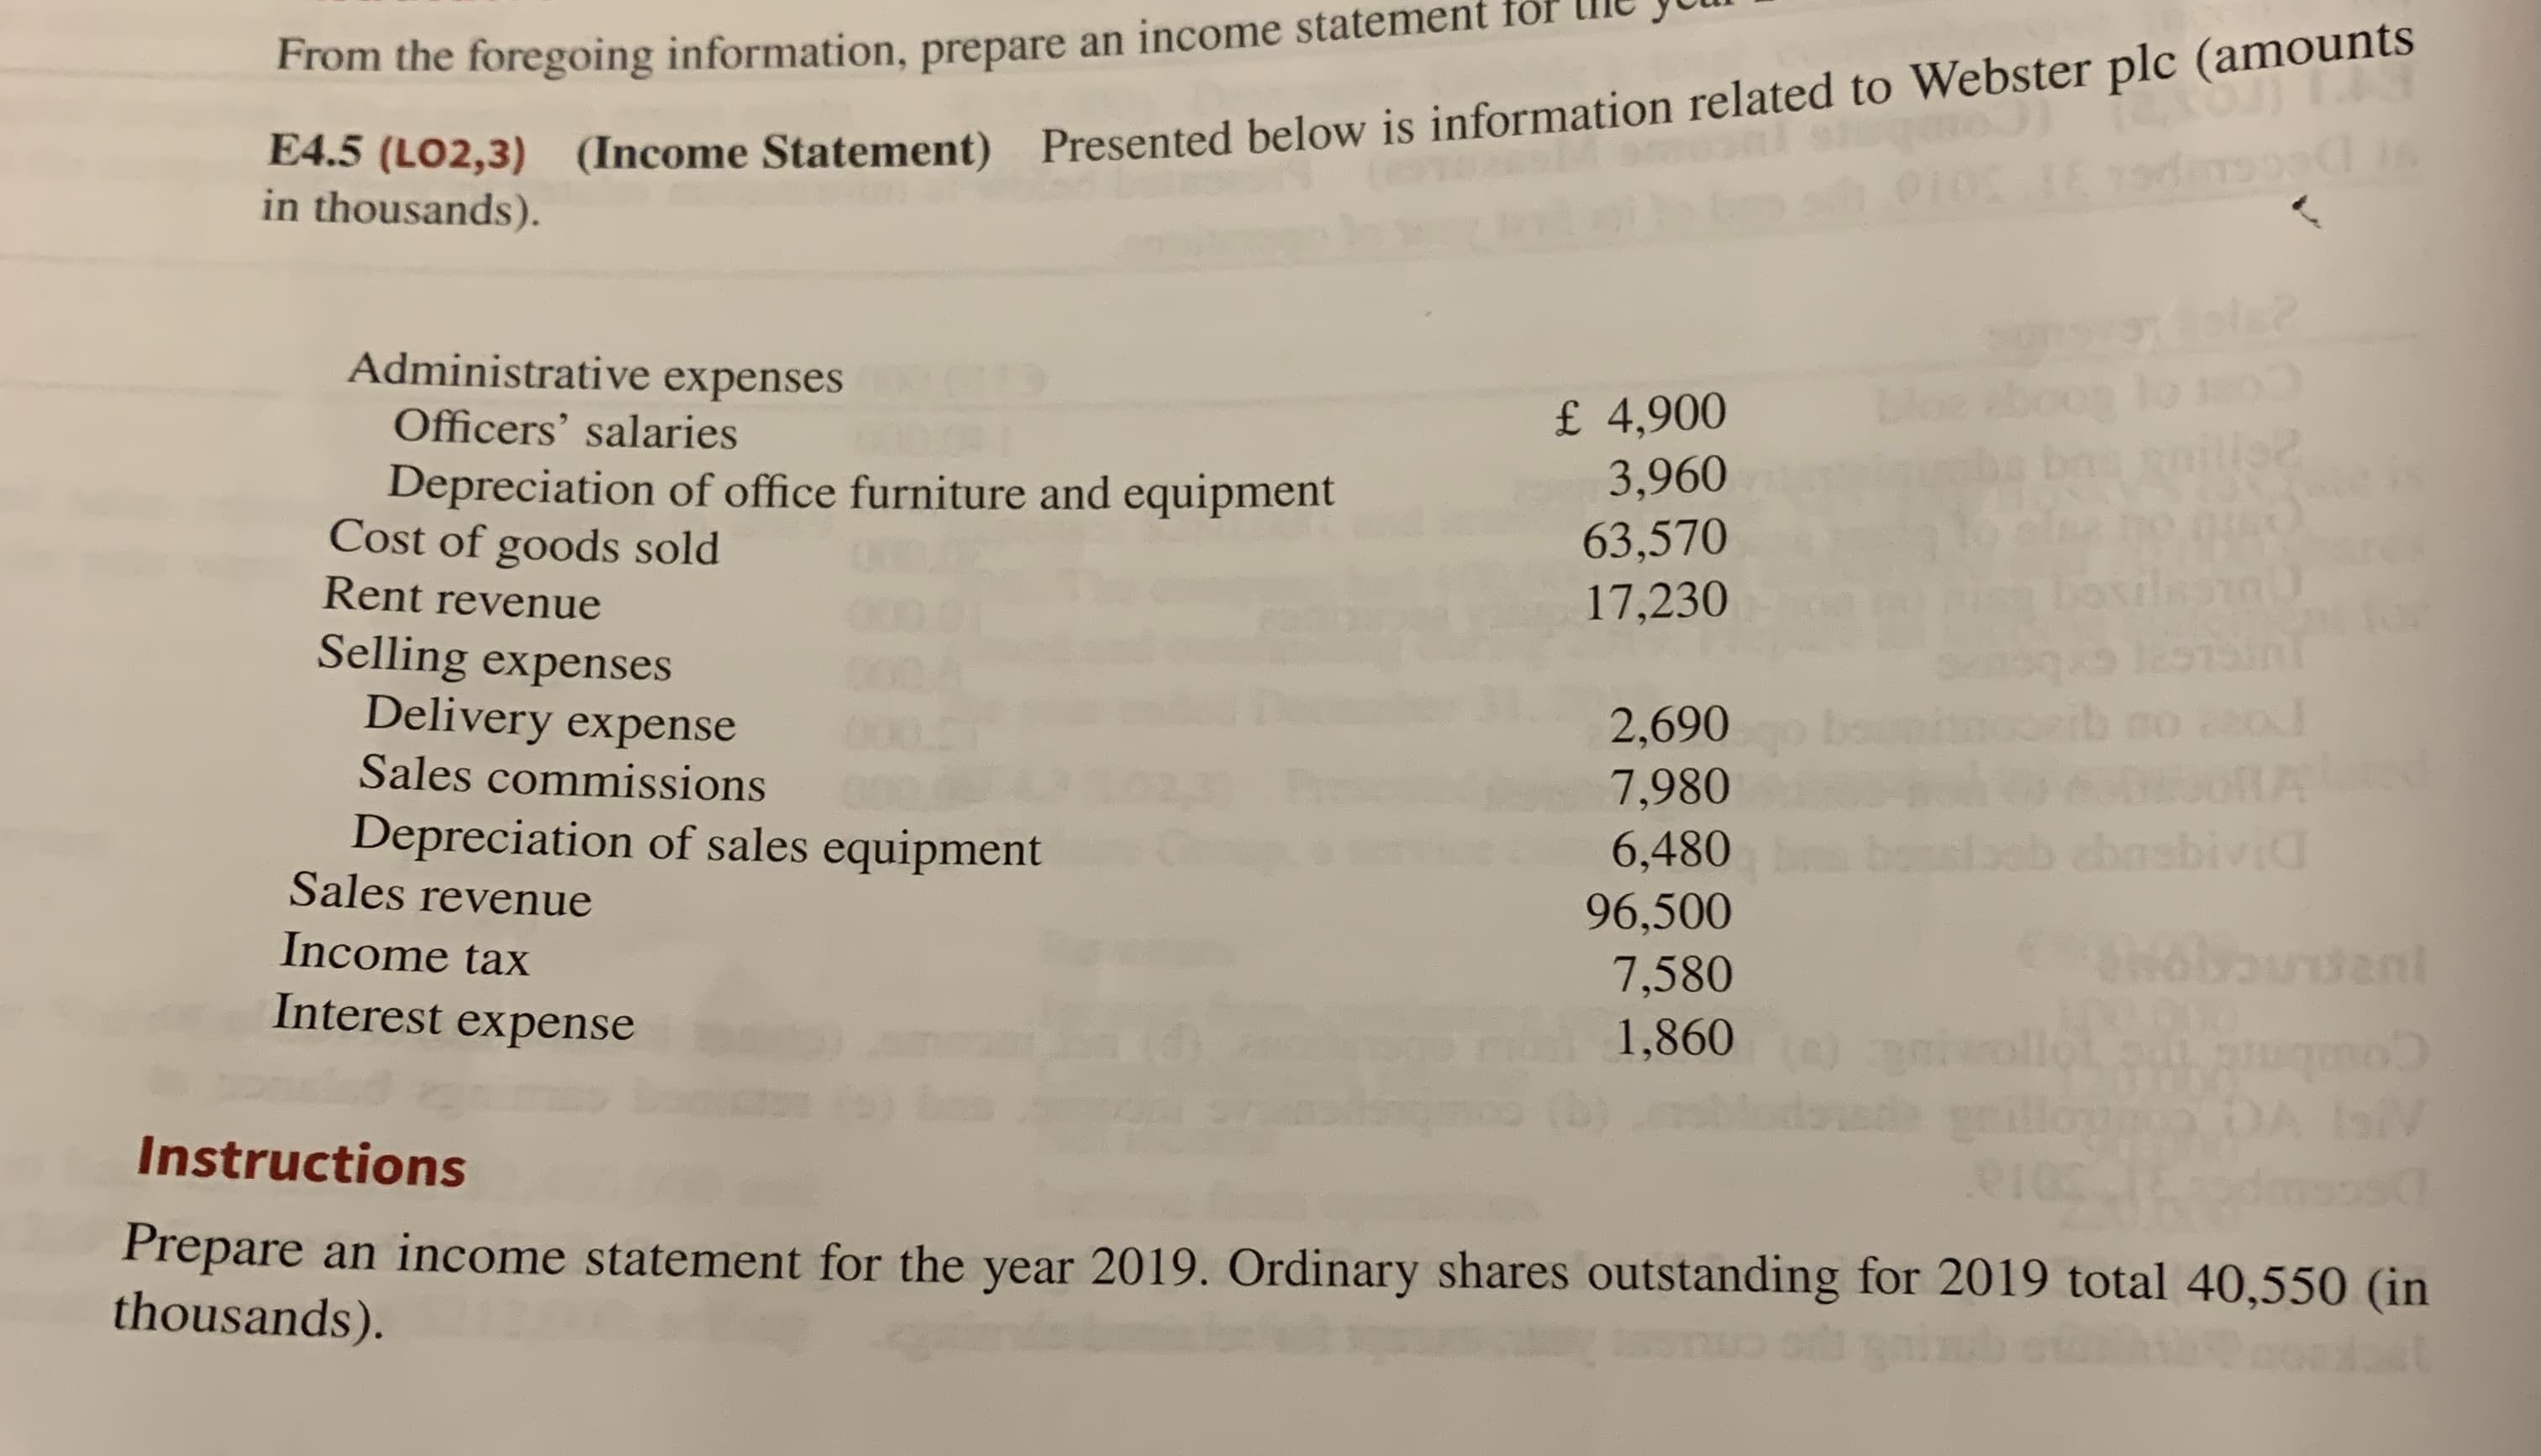 4.5 (L02,3) (Income Statement) Presented below is information related to Webster plc (amounts
in thousands).
From the foregoing information, prepare an income
dole?
Administrative expenses
bloe aboog lo
Roills2
£ 4,900
3,960
63,570
17,230
Officers' salaries
Depreciation of office furniture and equipment
Cost of goods sold
Rent revenue
bovilnam
Selling expenses
Delivery expense
2,690
7,980
6,480
96,500
7,580
1,860
Sales commissions
Depreciation of sales equipment
Sales revenue
ebasbivid
Income tax
Shobaudent
Interest expense
wollot
Instructions
Prepare an income statement for the year 2019. Ordinary shares outstanding for 2019 total 40,550 (in
thousands).
